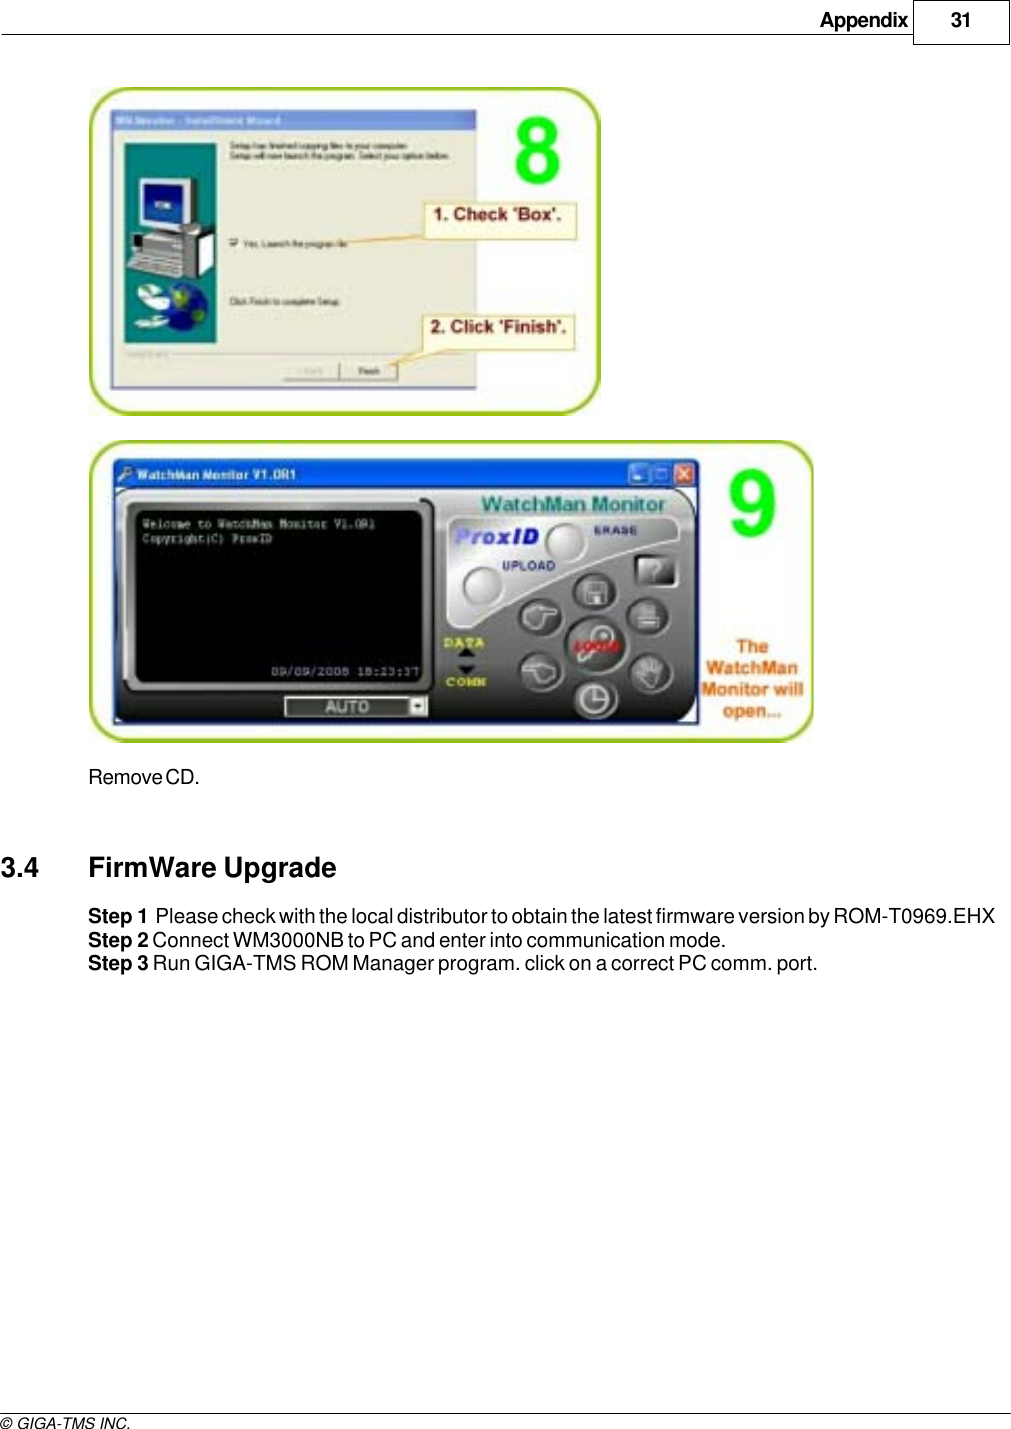 Appendix 31© GIGA-TMS INC.Remove CD.3.4 FirmWare UpgradeStep 1  Please check with the local distributor to obtain the latest firmware version by ROM-T0969.EHX Step 2 Connect WM3000NB to PC and enter into communication mode.Step 3 Run GIGA-TMS ROM Manager program. click on a correct PC comm. port.